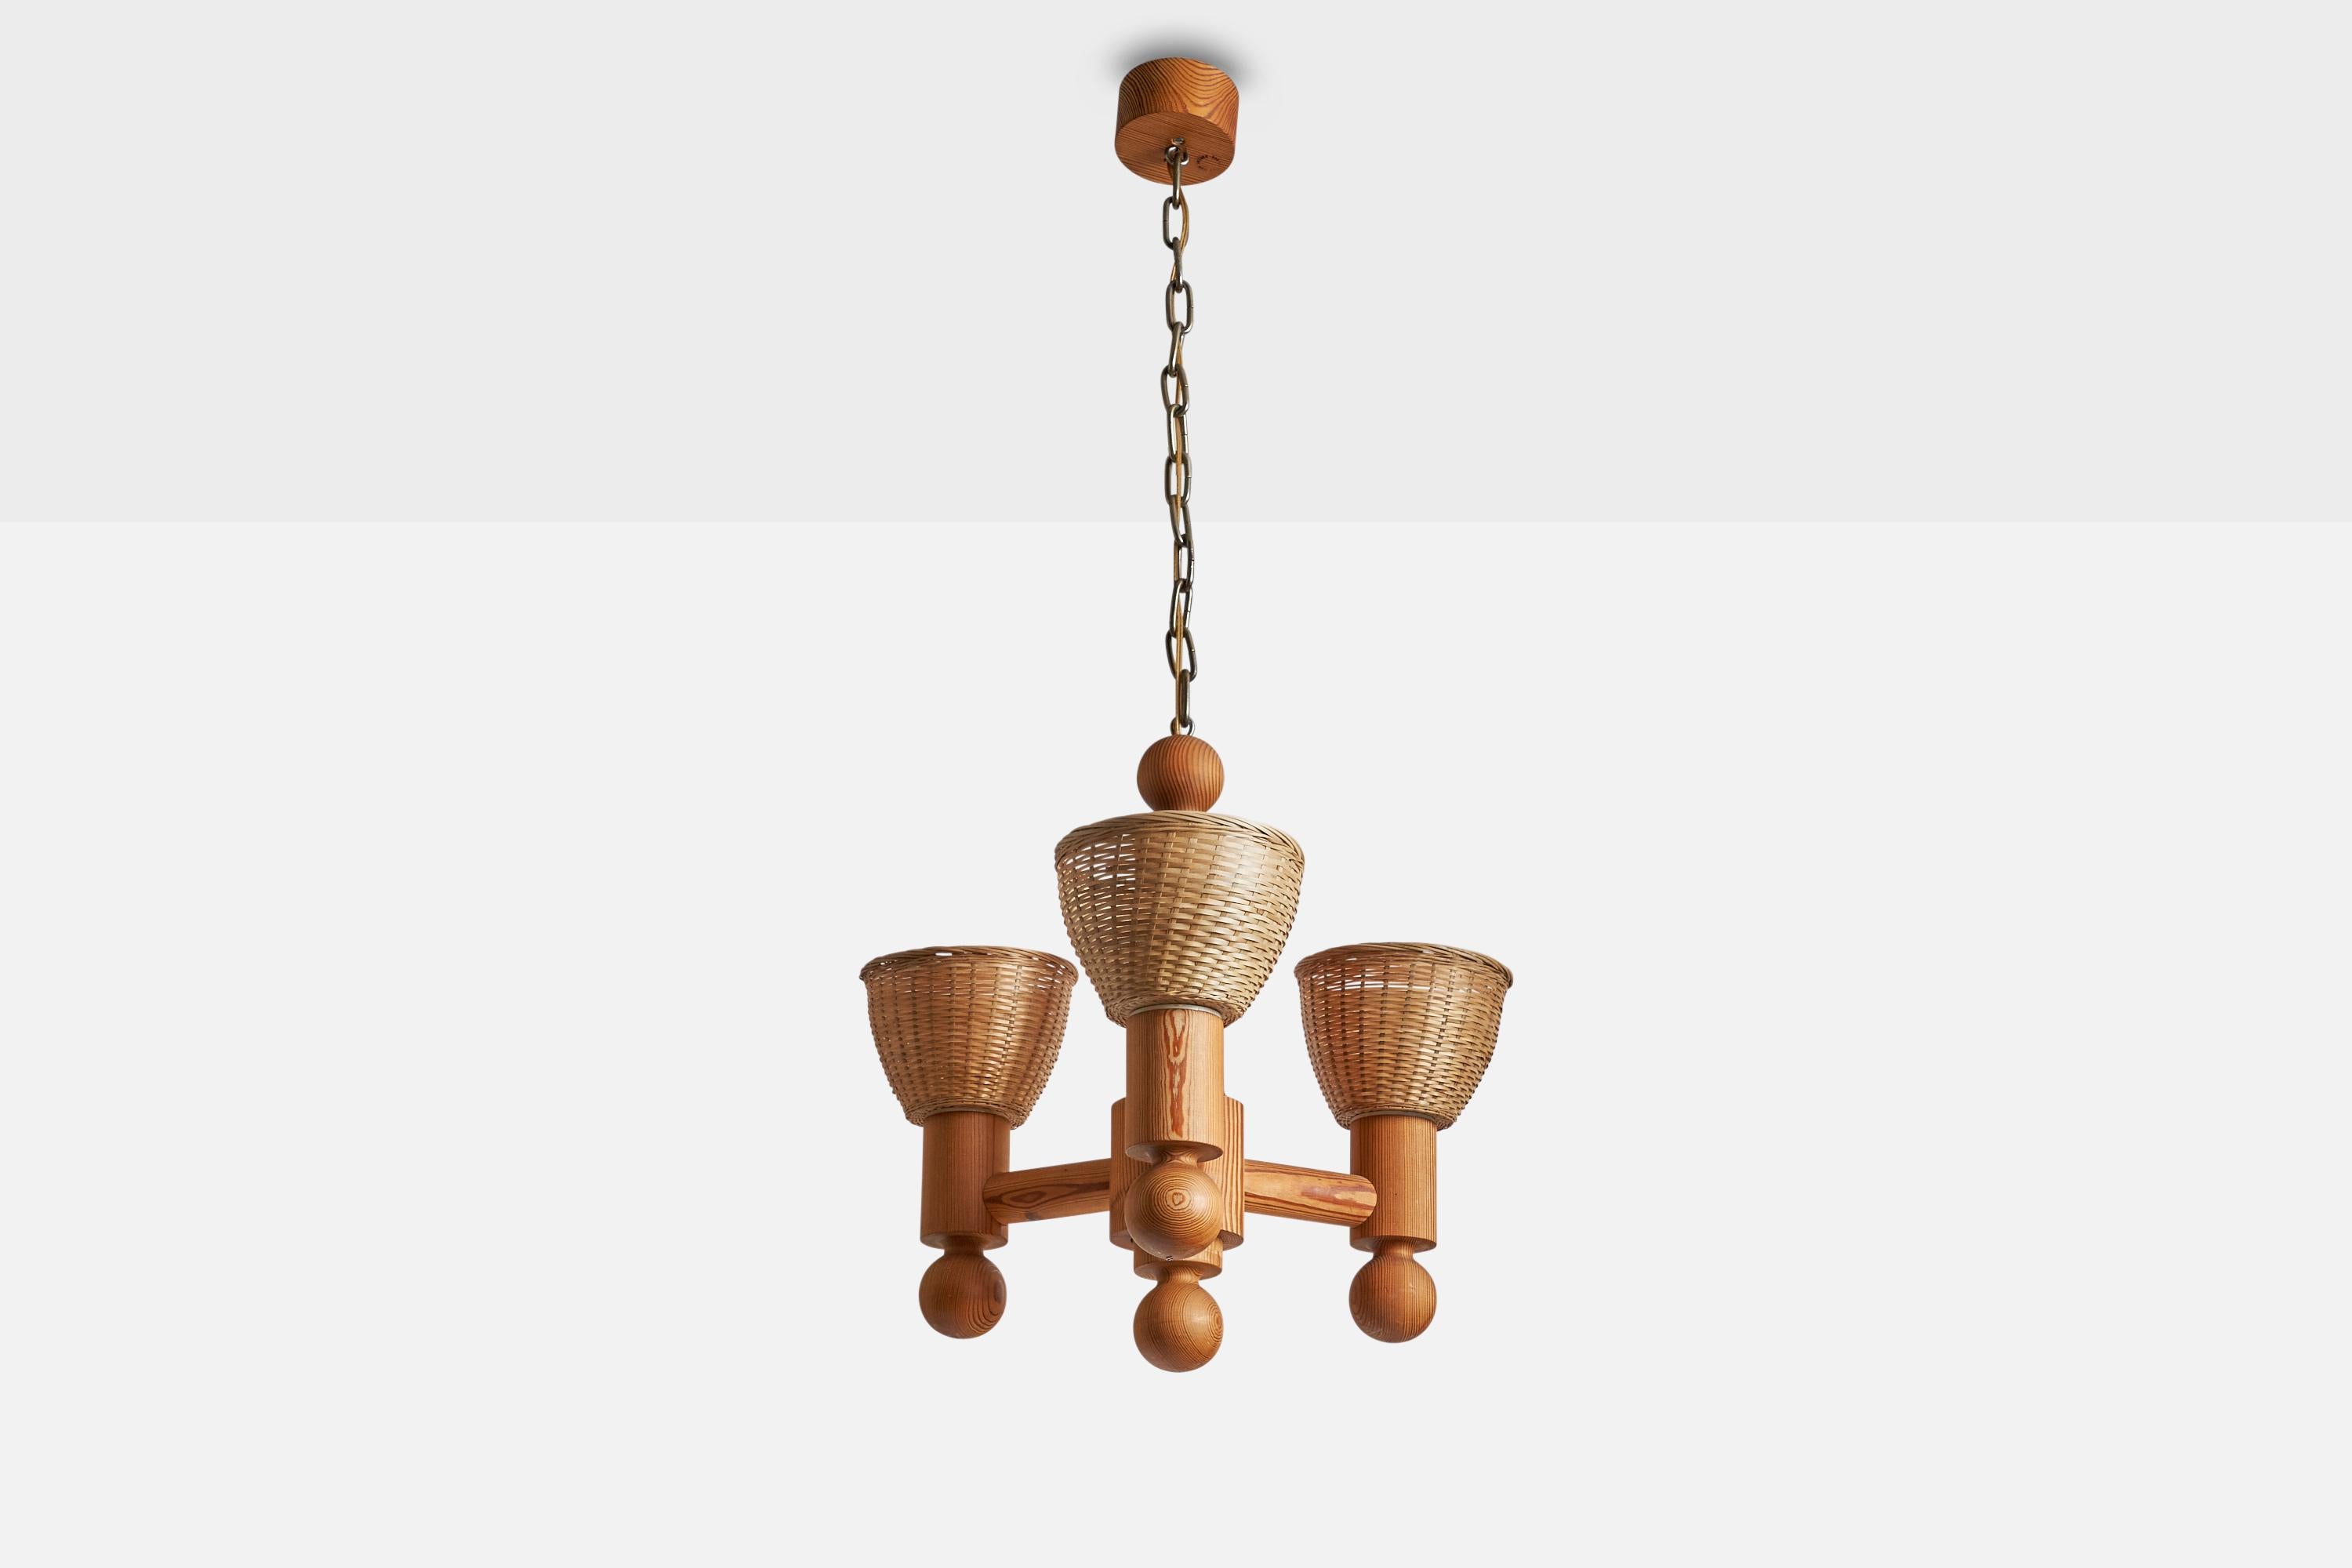 A pine and rattan chandelier designed by Uno and Östen Kristiansson and produced by Luxus, Vittsjö, Sweden, 1970s.

Dimensions of canopy (inches): 2.25” H x 4” Diameter
Socket takes standard E-26 bulbs. 3 sockets.There is no maximum wattage stated